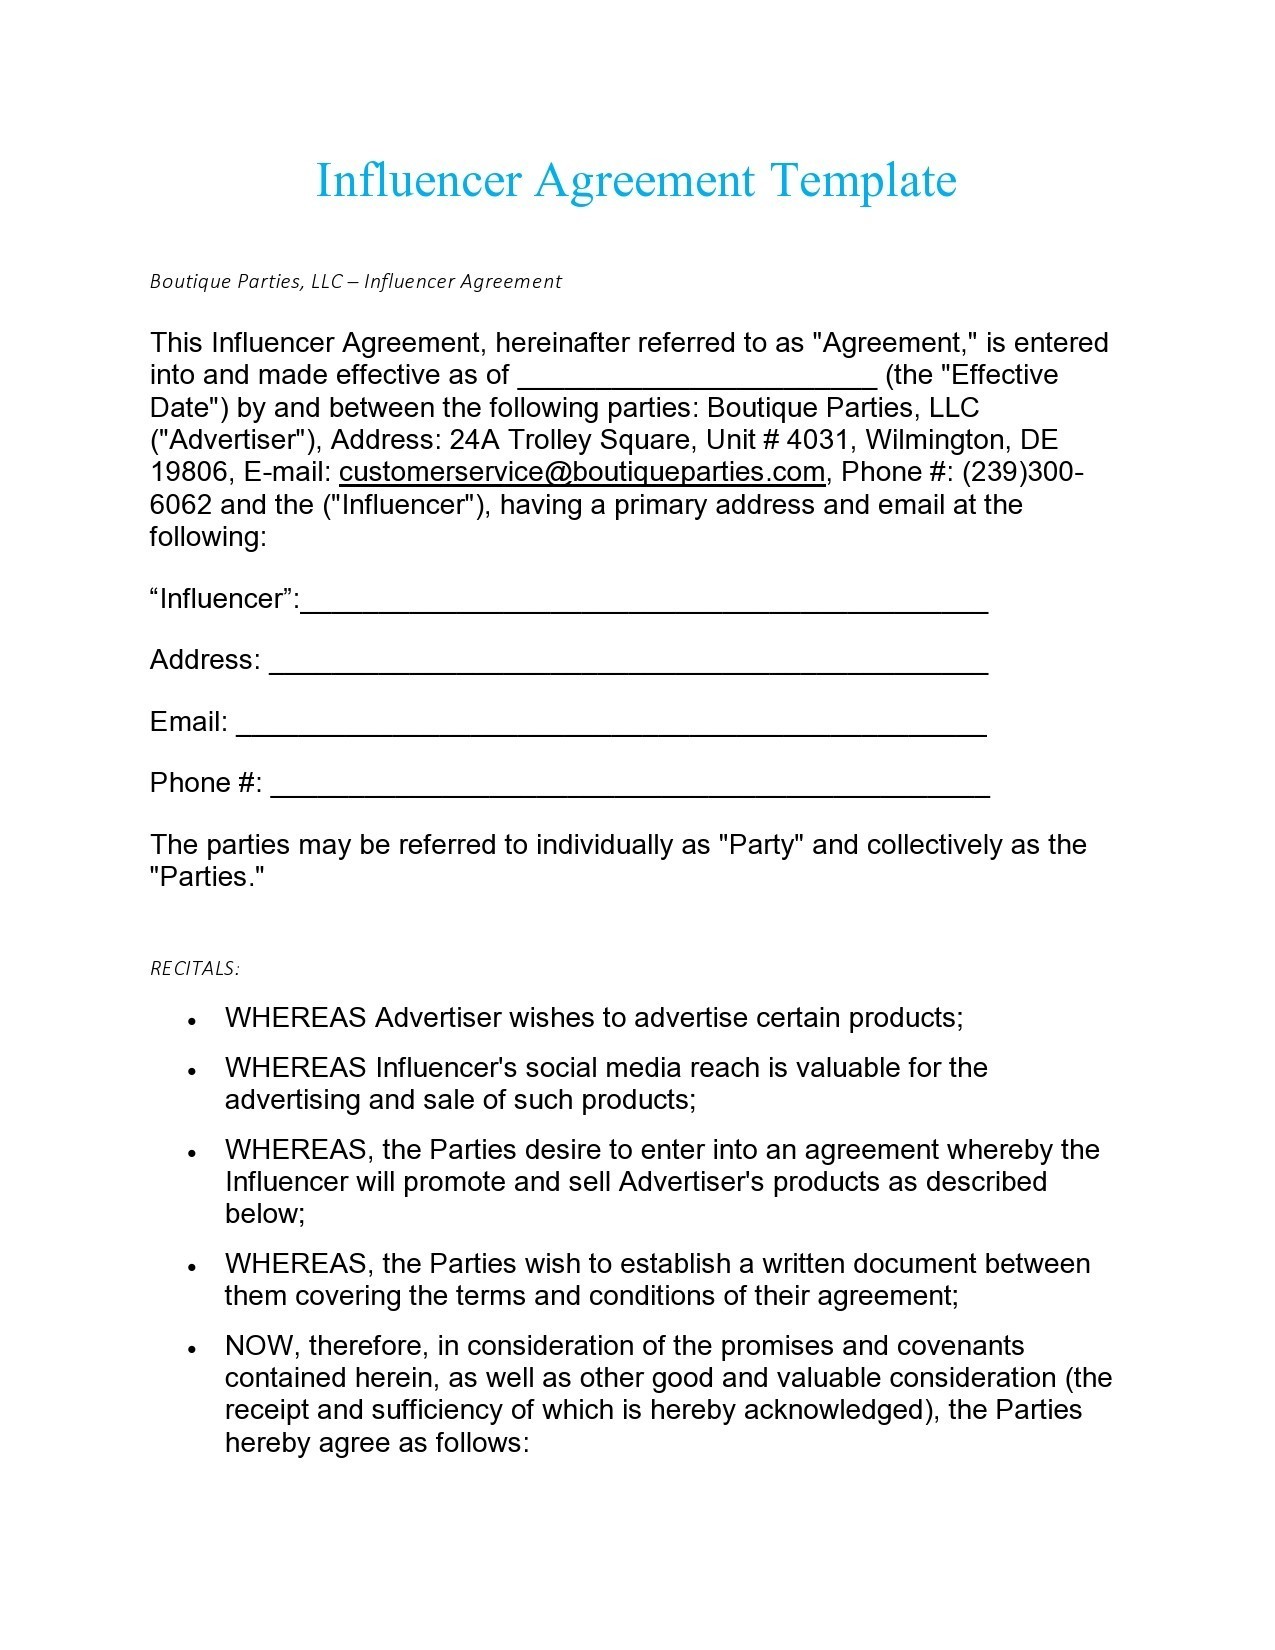 Free influencer contract template 21